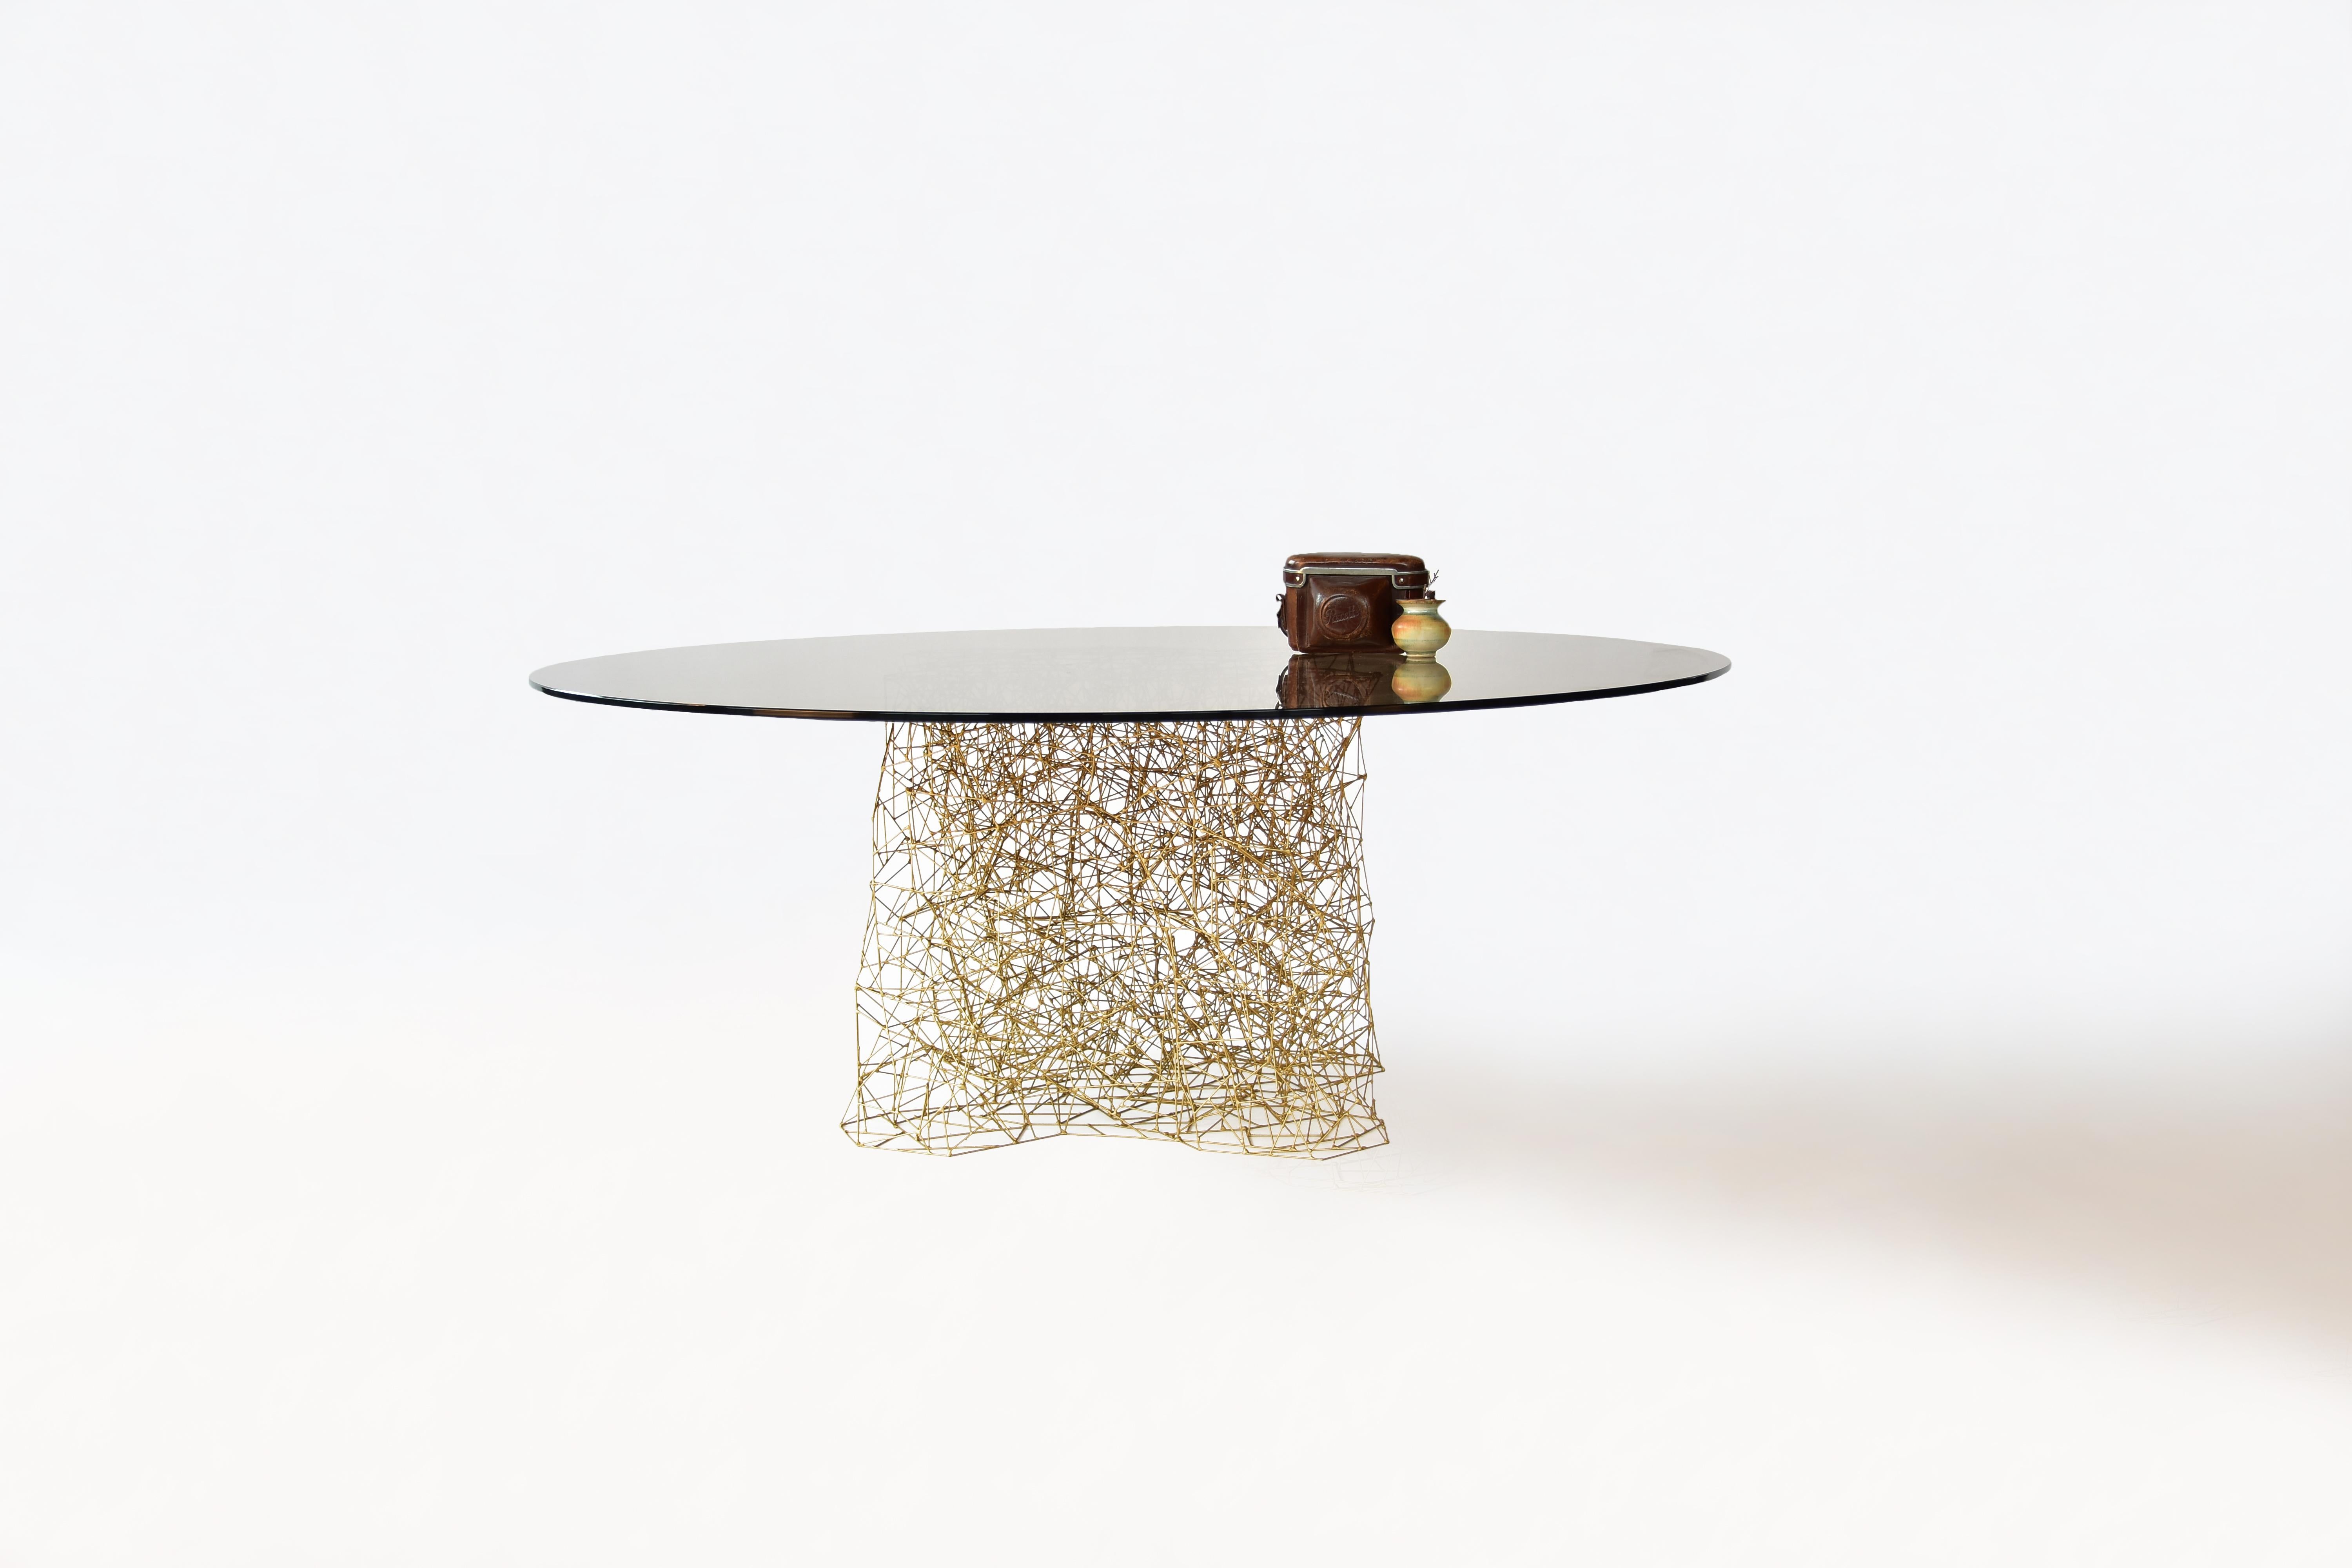 Together table by Eichkorn
Dimensions: D 100 x H 38
Materials: copper rods, bronce tinted glass plate.
Available in coffee table or in dining table size.

More than 1000 copper rods are individually assembled by hand to the desired shape. Only